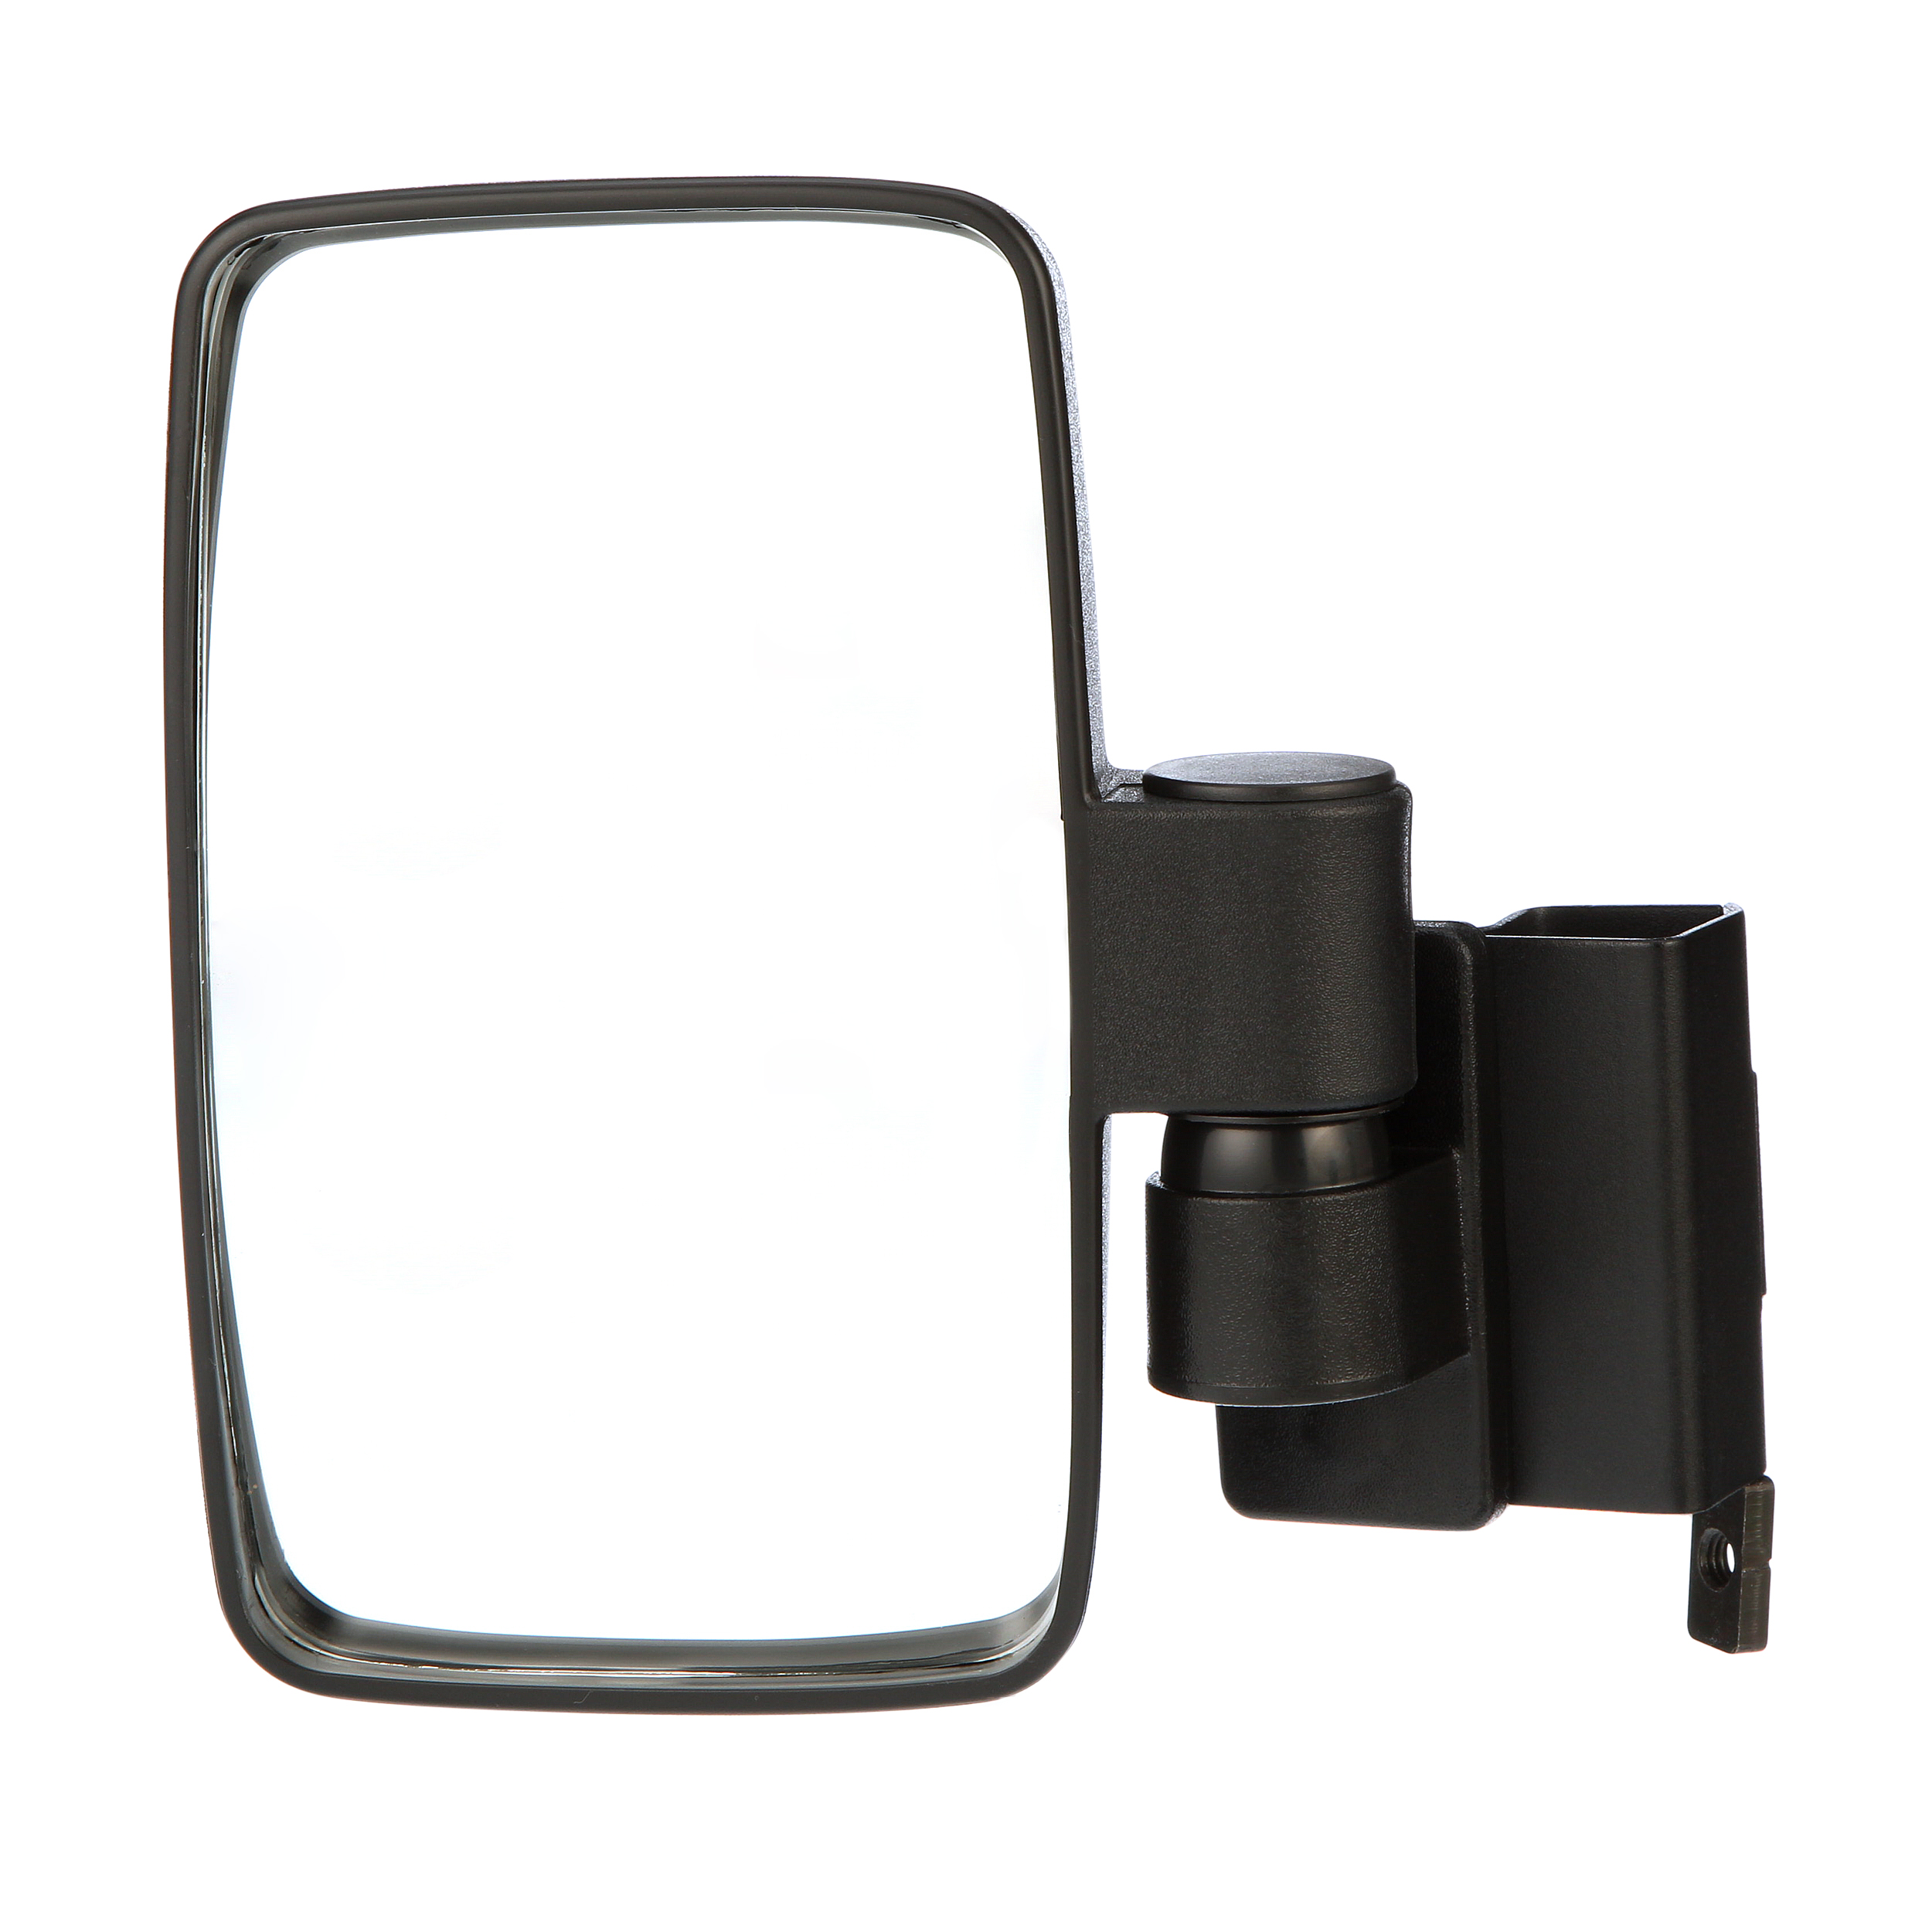 CIPA Golf Cart Side Mount Mirror with Brackets - image 2 of 7